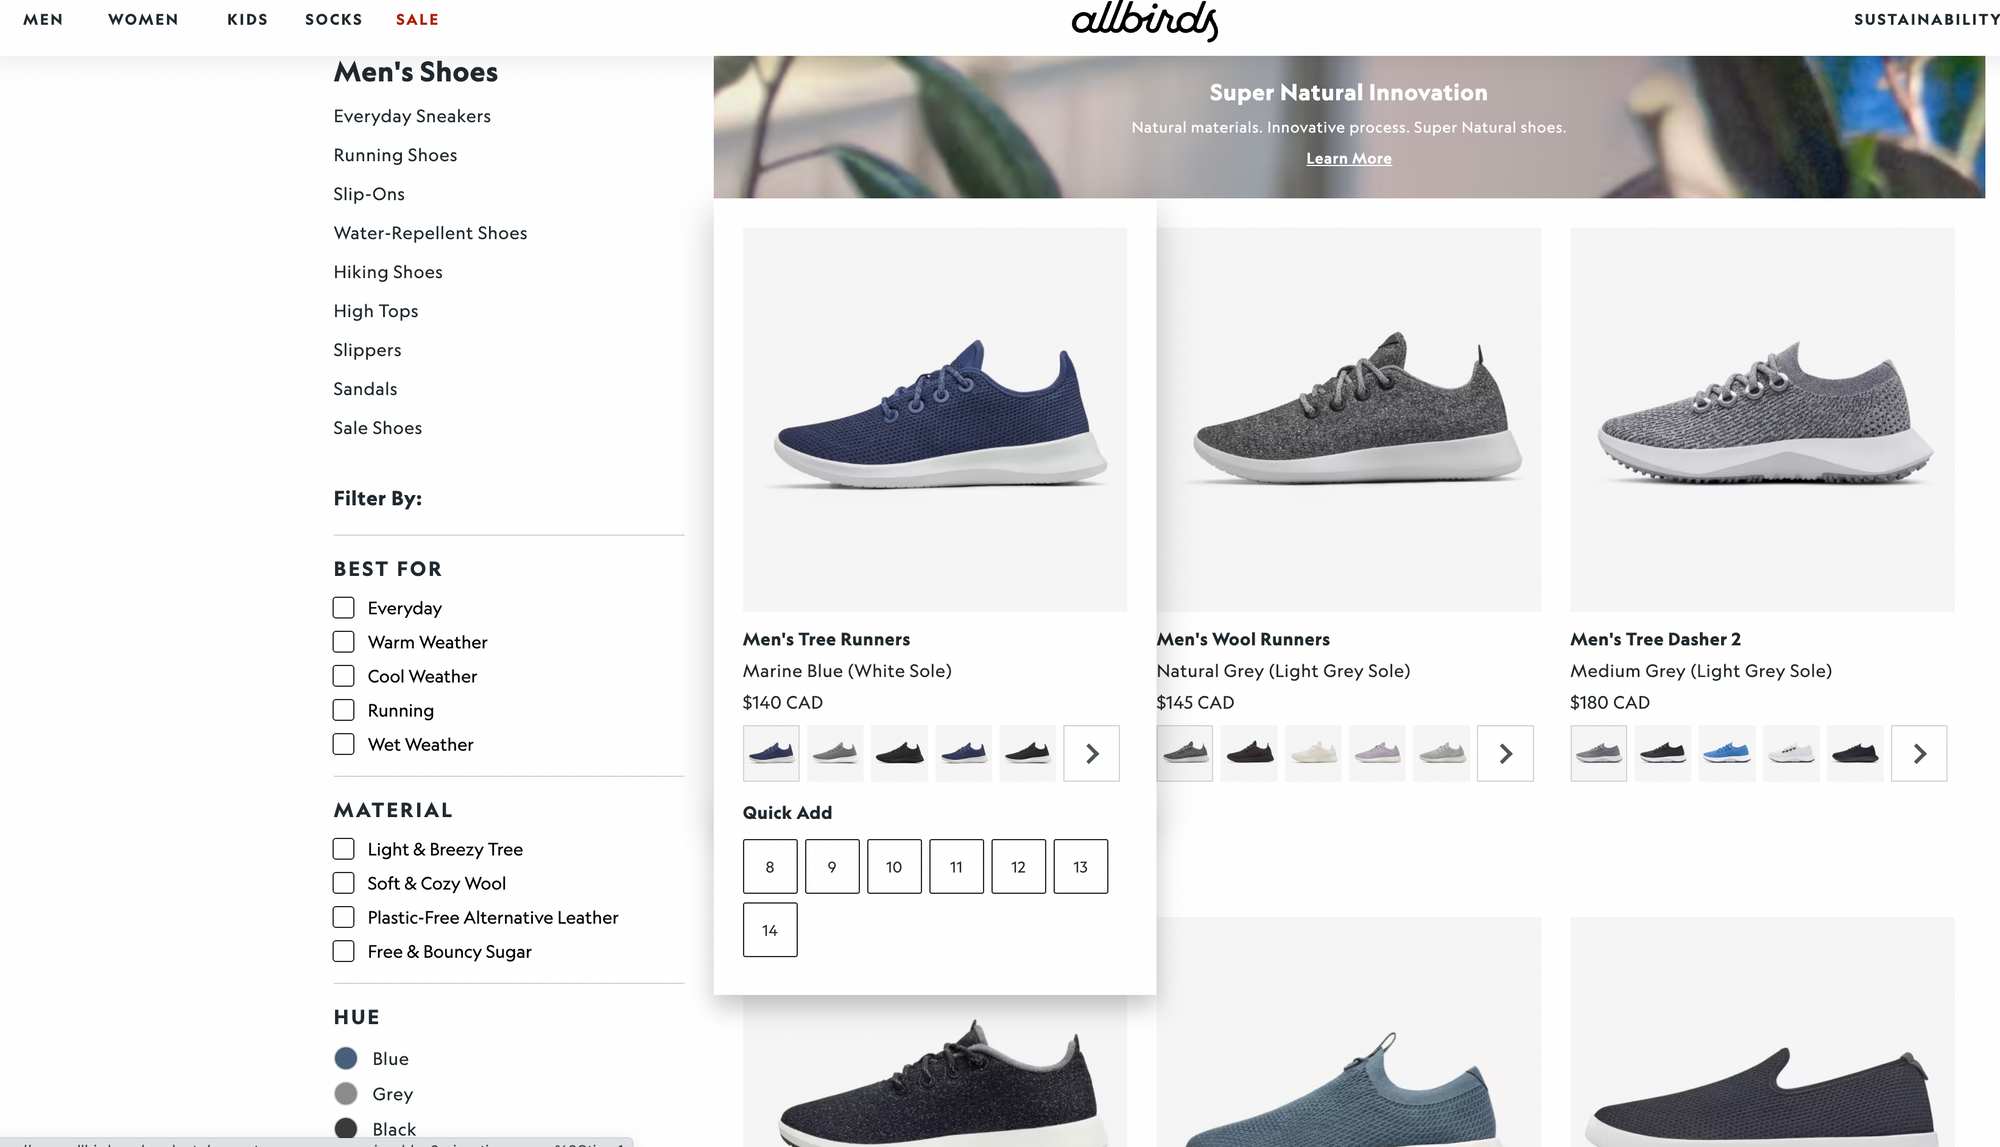 Allbirds uses filtered views on its product listing page to help customers find the products that best meet their needs.